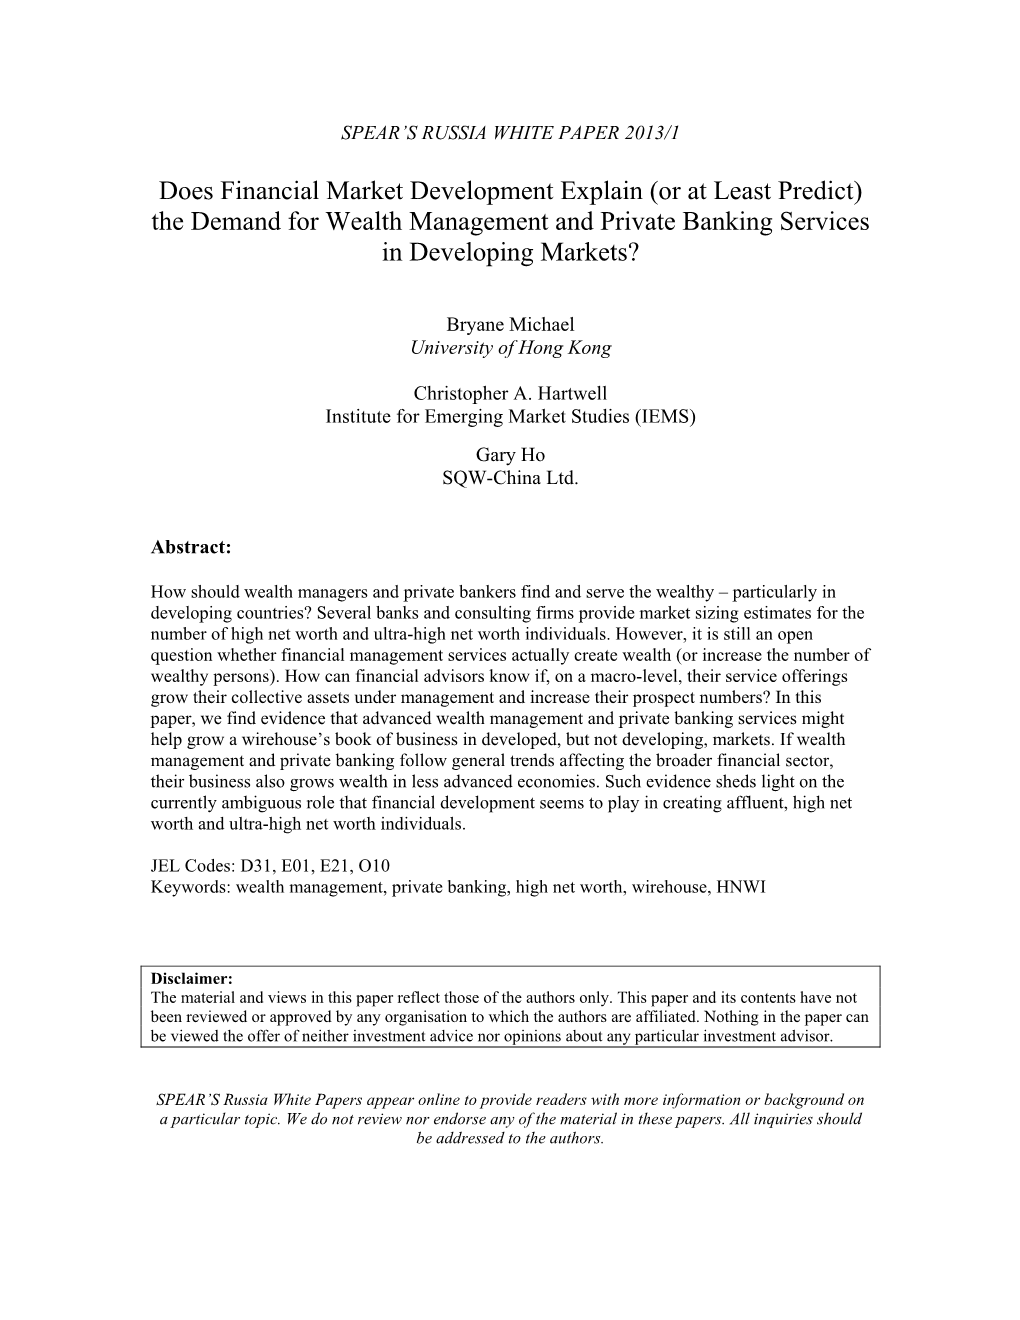 Does Financial Market Development Help Predict Demand for Private Banking and High Net Worth Advisors